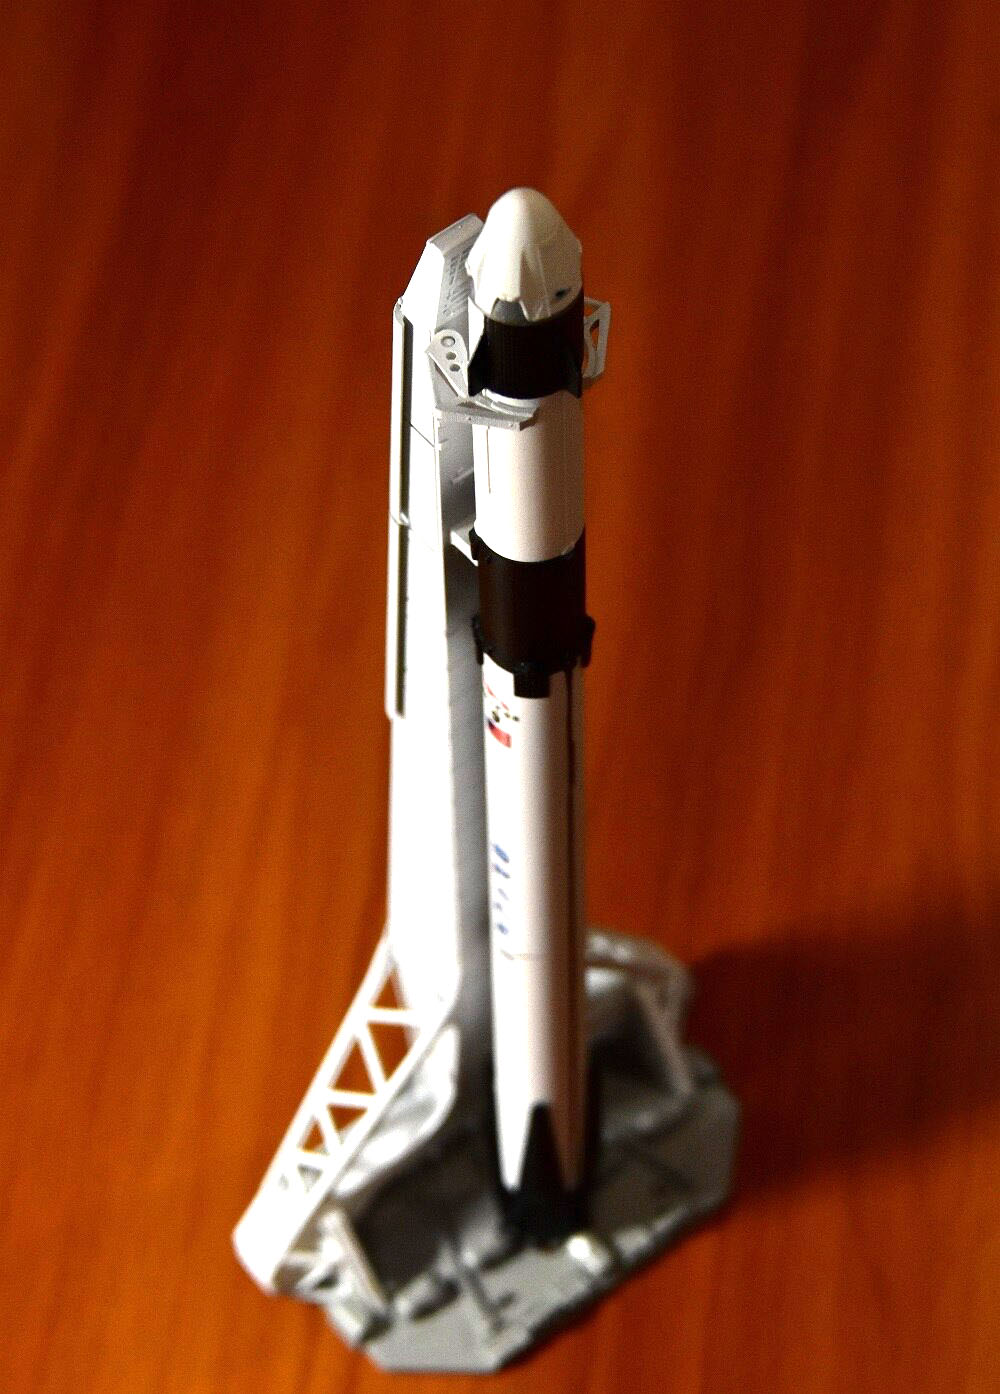 ALDO > Hobbies & Creative Arts> Collectibles> Scale Model NASA SpaceX Falcon 9 Rocket Manned Dragon Space Ship on Tower Launch Pad Spacecraft Desk Top Display.